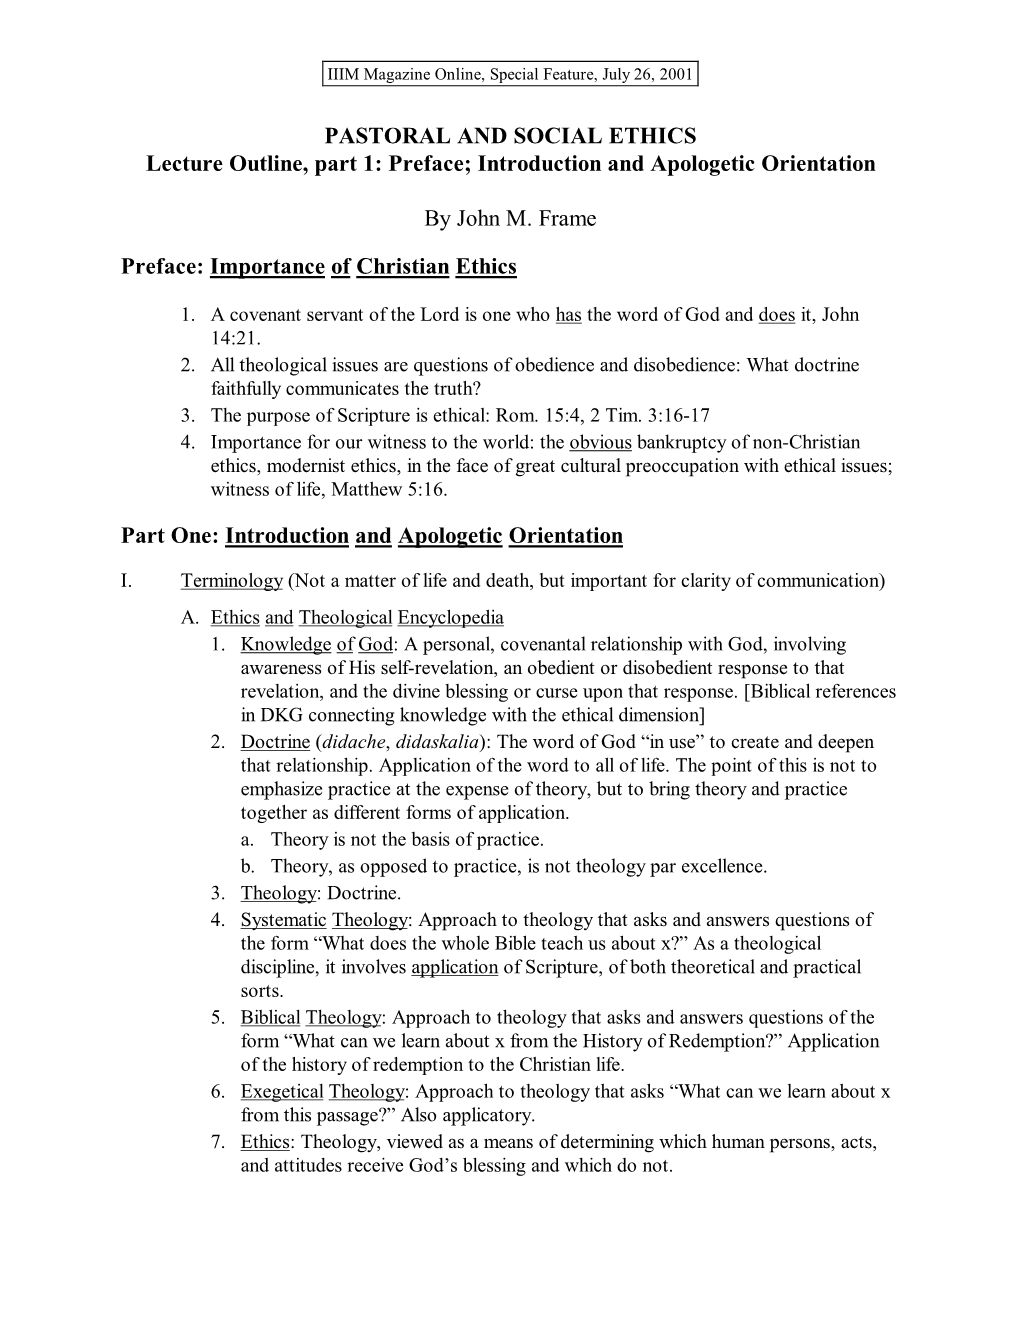 PASTORAL and SOCIAL ETHICS Lecture Outline, Part 1: Preface; Introduction and Apologetic Orientation